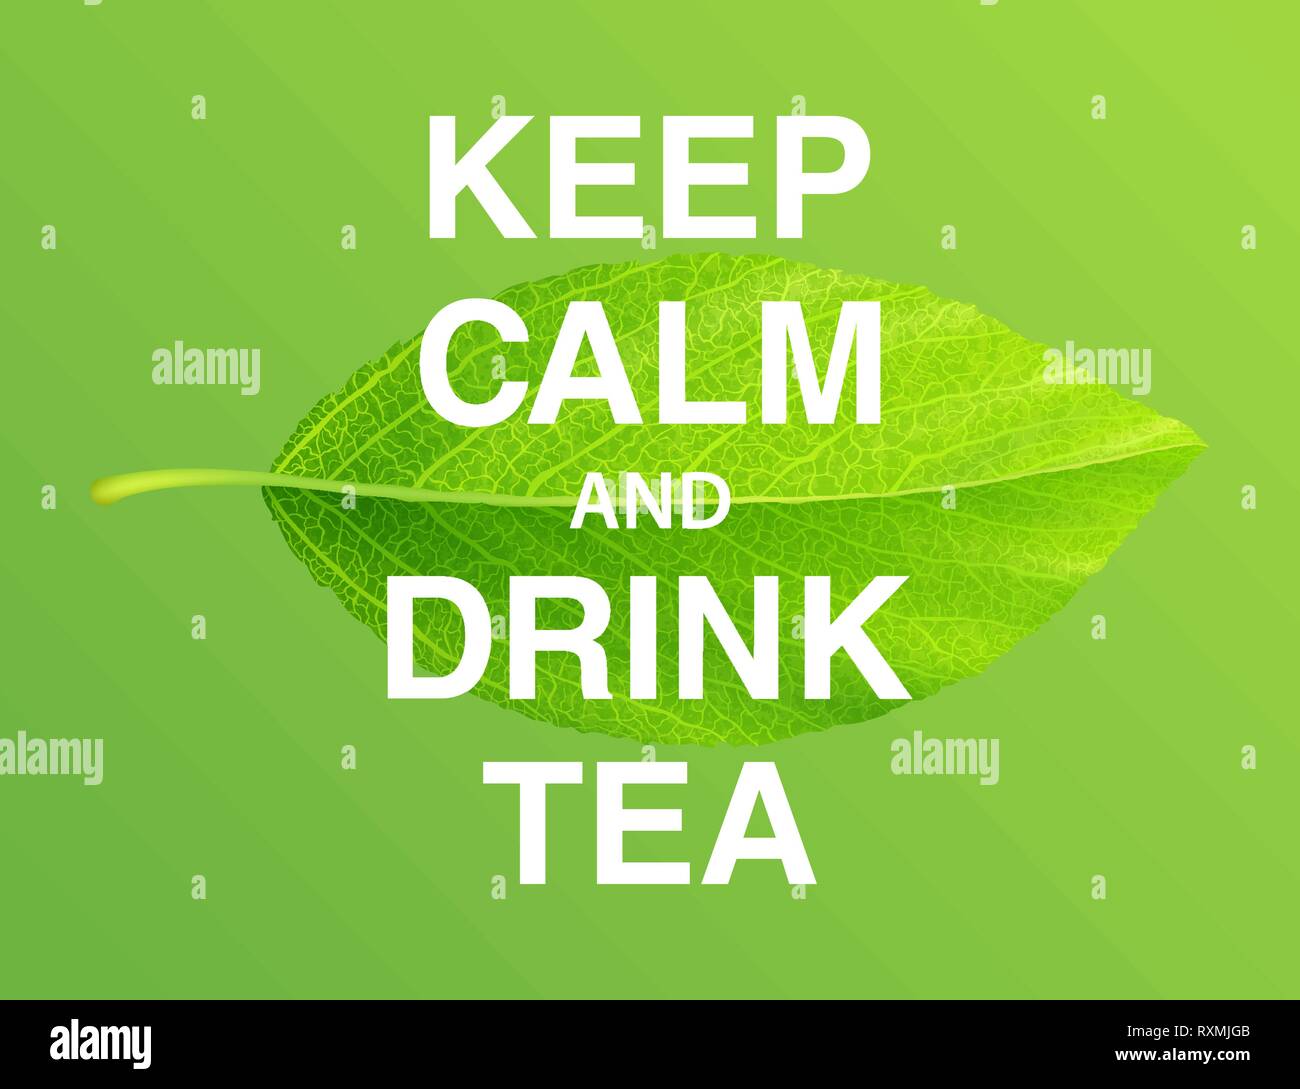 Keep calm and drink tea. Motivational poster Stock Vector